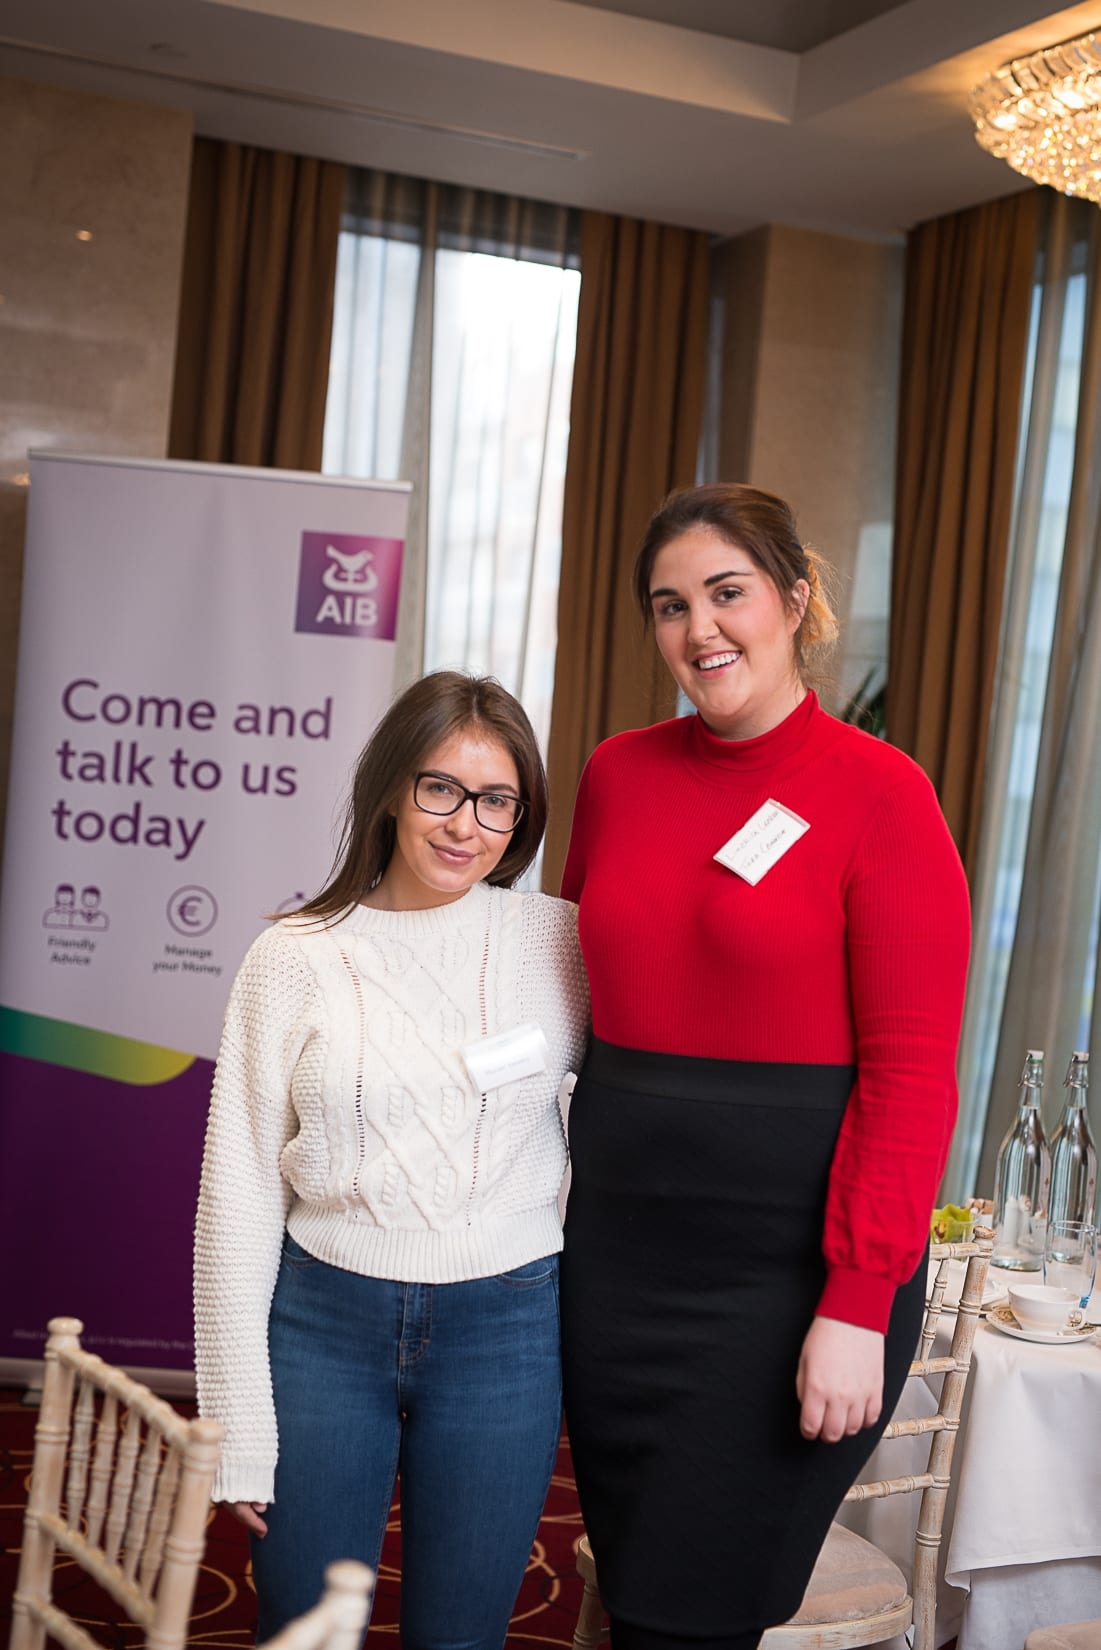 No repro fee- At the Limerick Chamber business briefing on ‘Spending Trends: Tourism, Retail &  Hospitality Industry Insights & Marketing Trends’ at the Savoy Hotel  - 22-01-2019, From Left to Right:Maxine Amodeo - Tuscany Bistro, Tara Cannon - Limerick Leader. 
Photo credit Shauna Kennedy